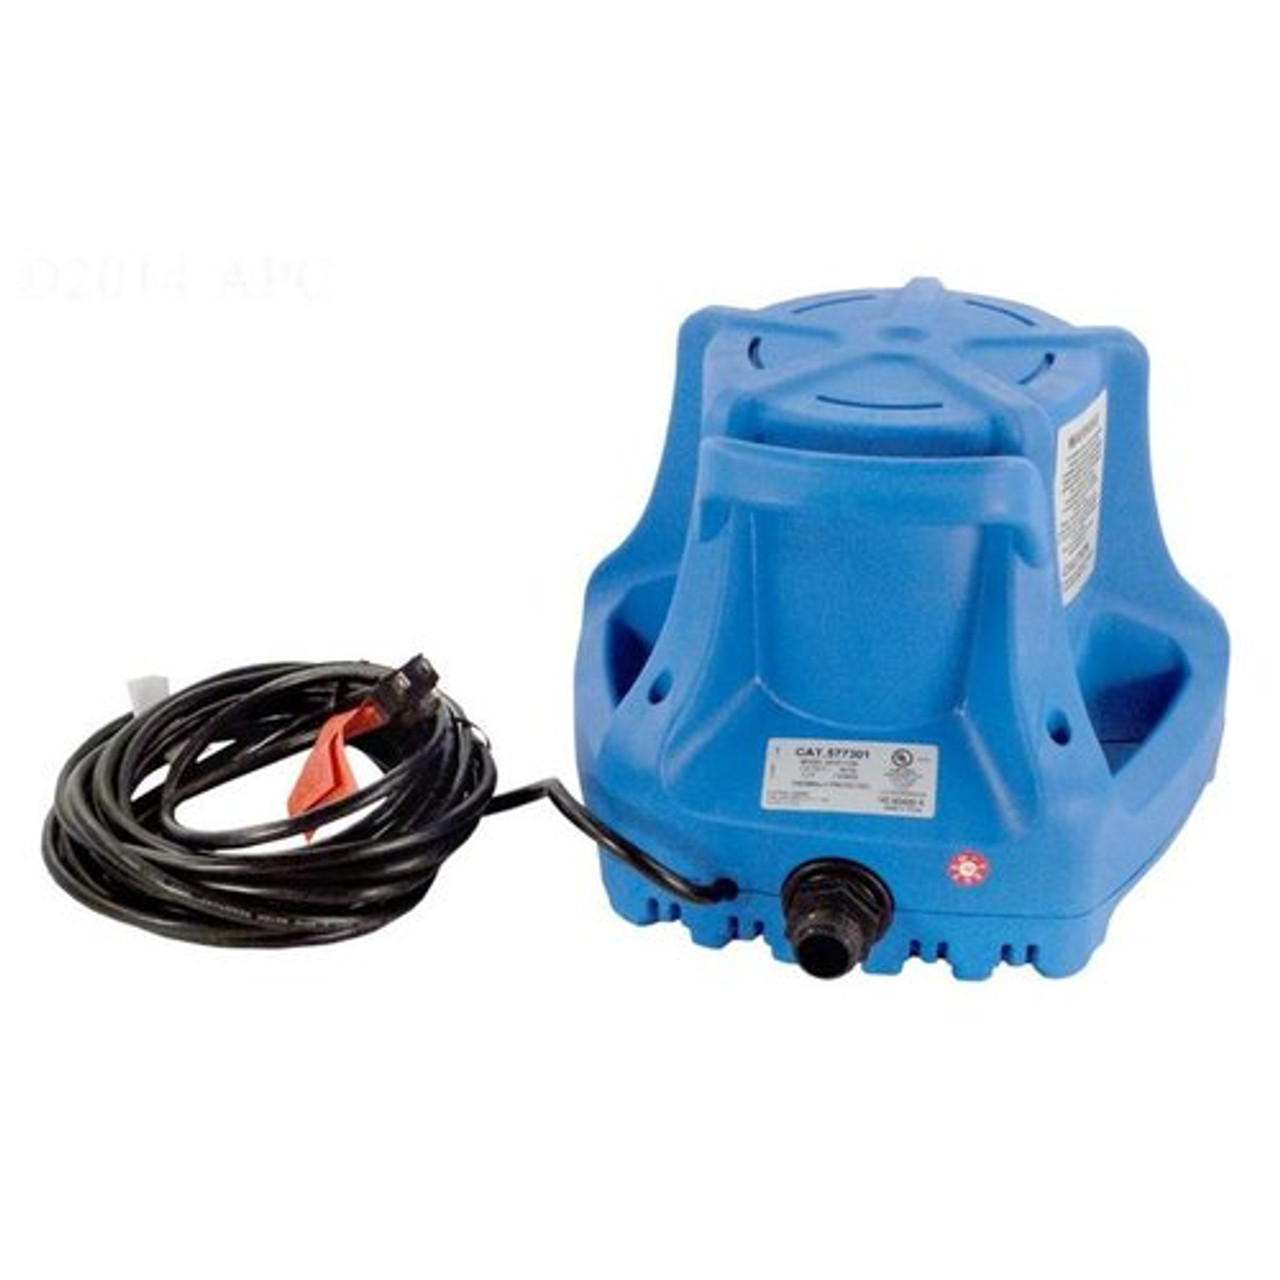 APC Little Giant Pool Cover Pump with 25' Cord, 1700 GPH, 115V, APCP1700